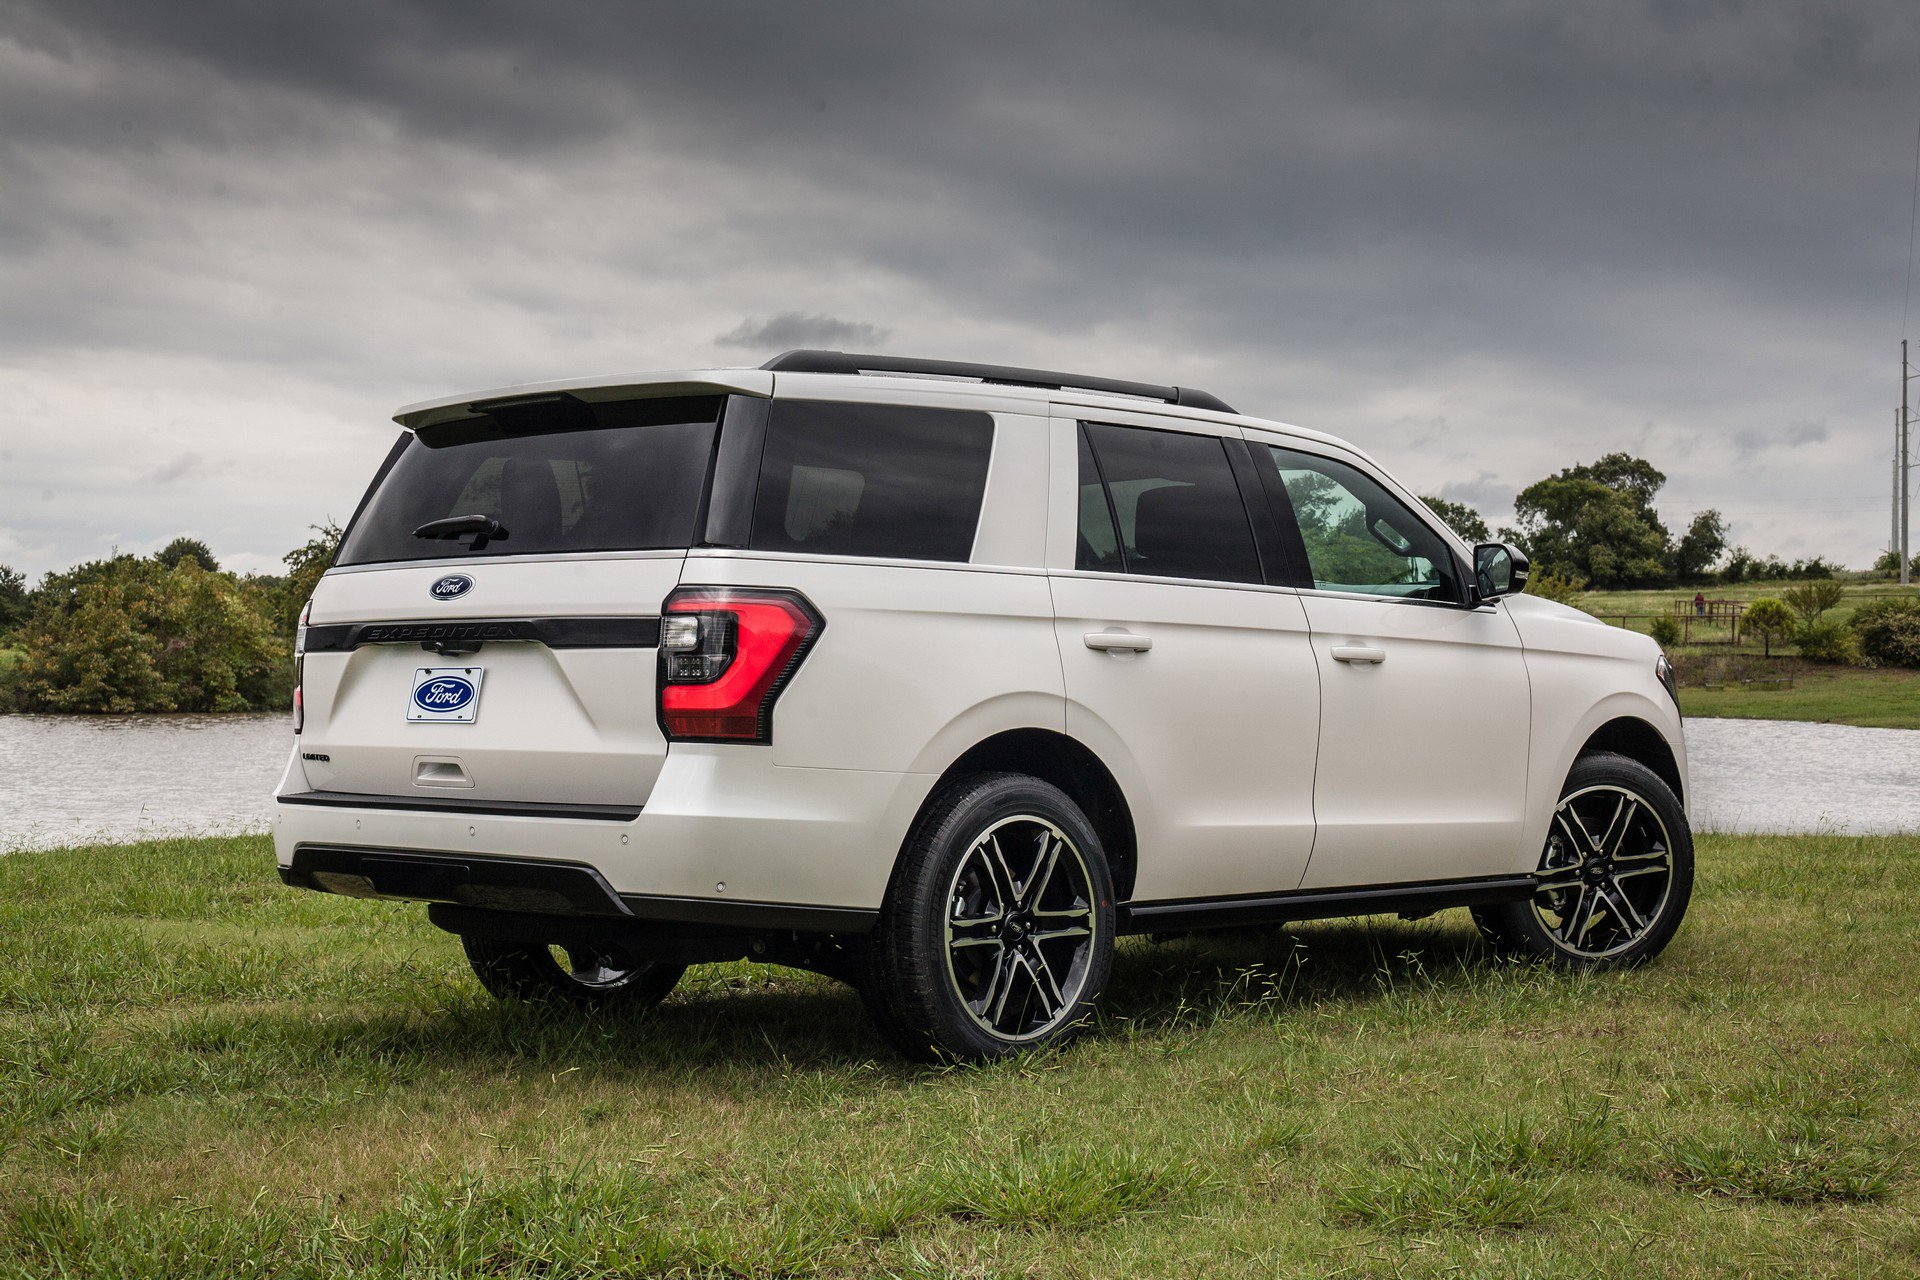 2019-ford-expedition-stealth-edition-white-1.jpg